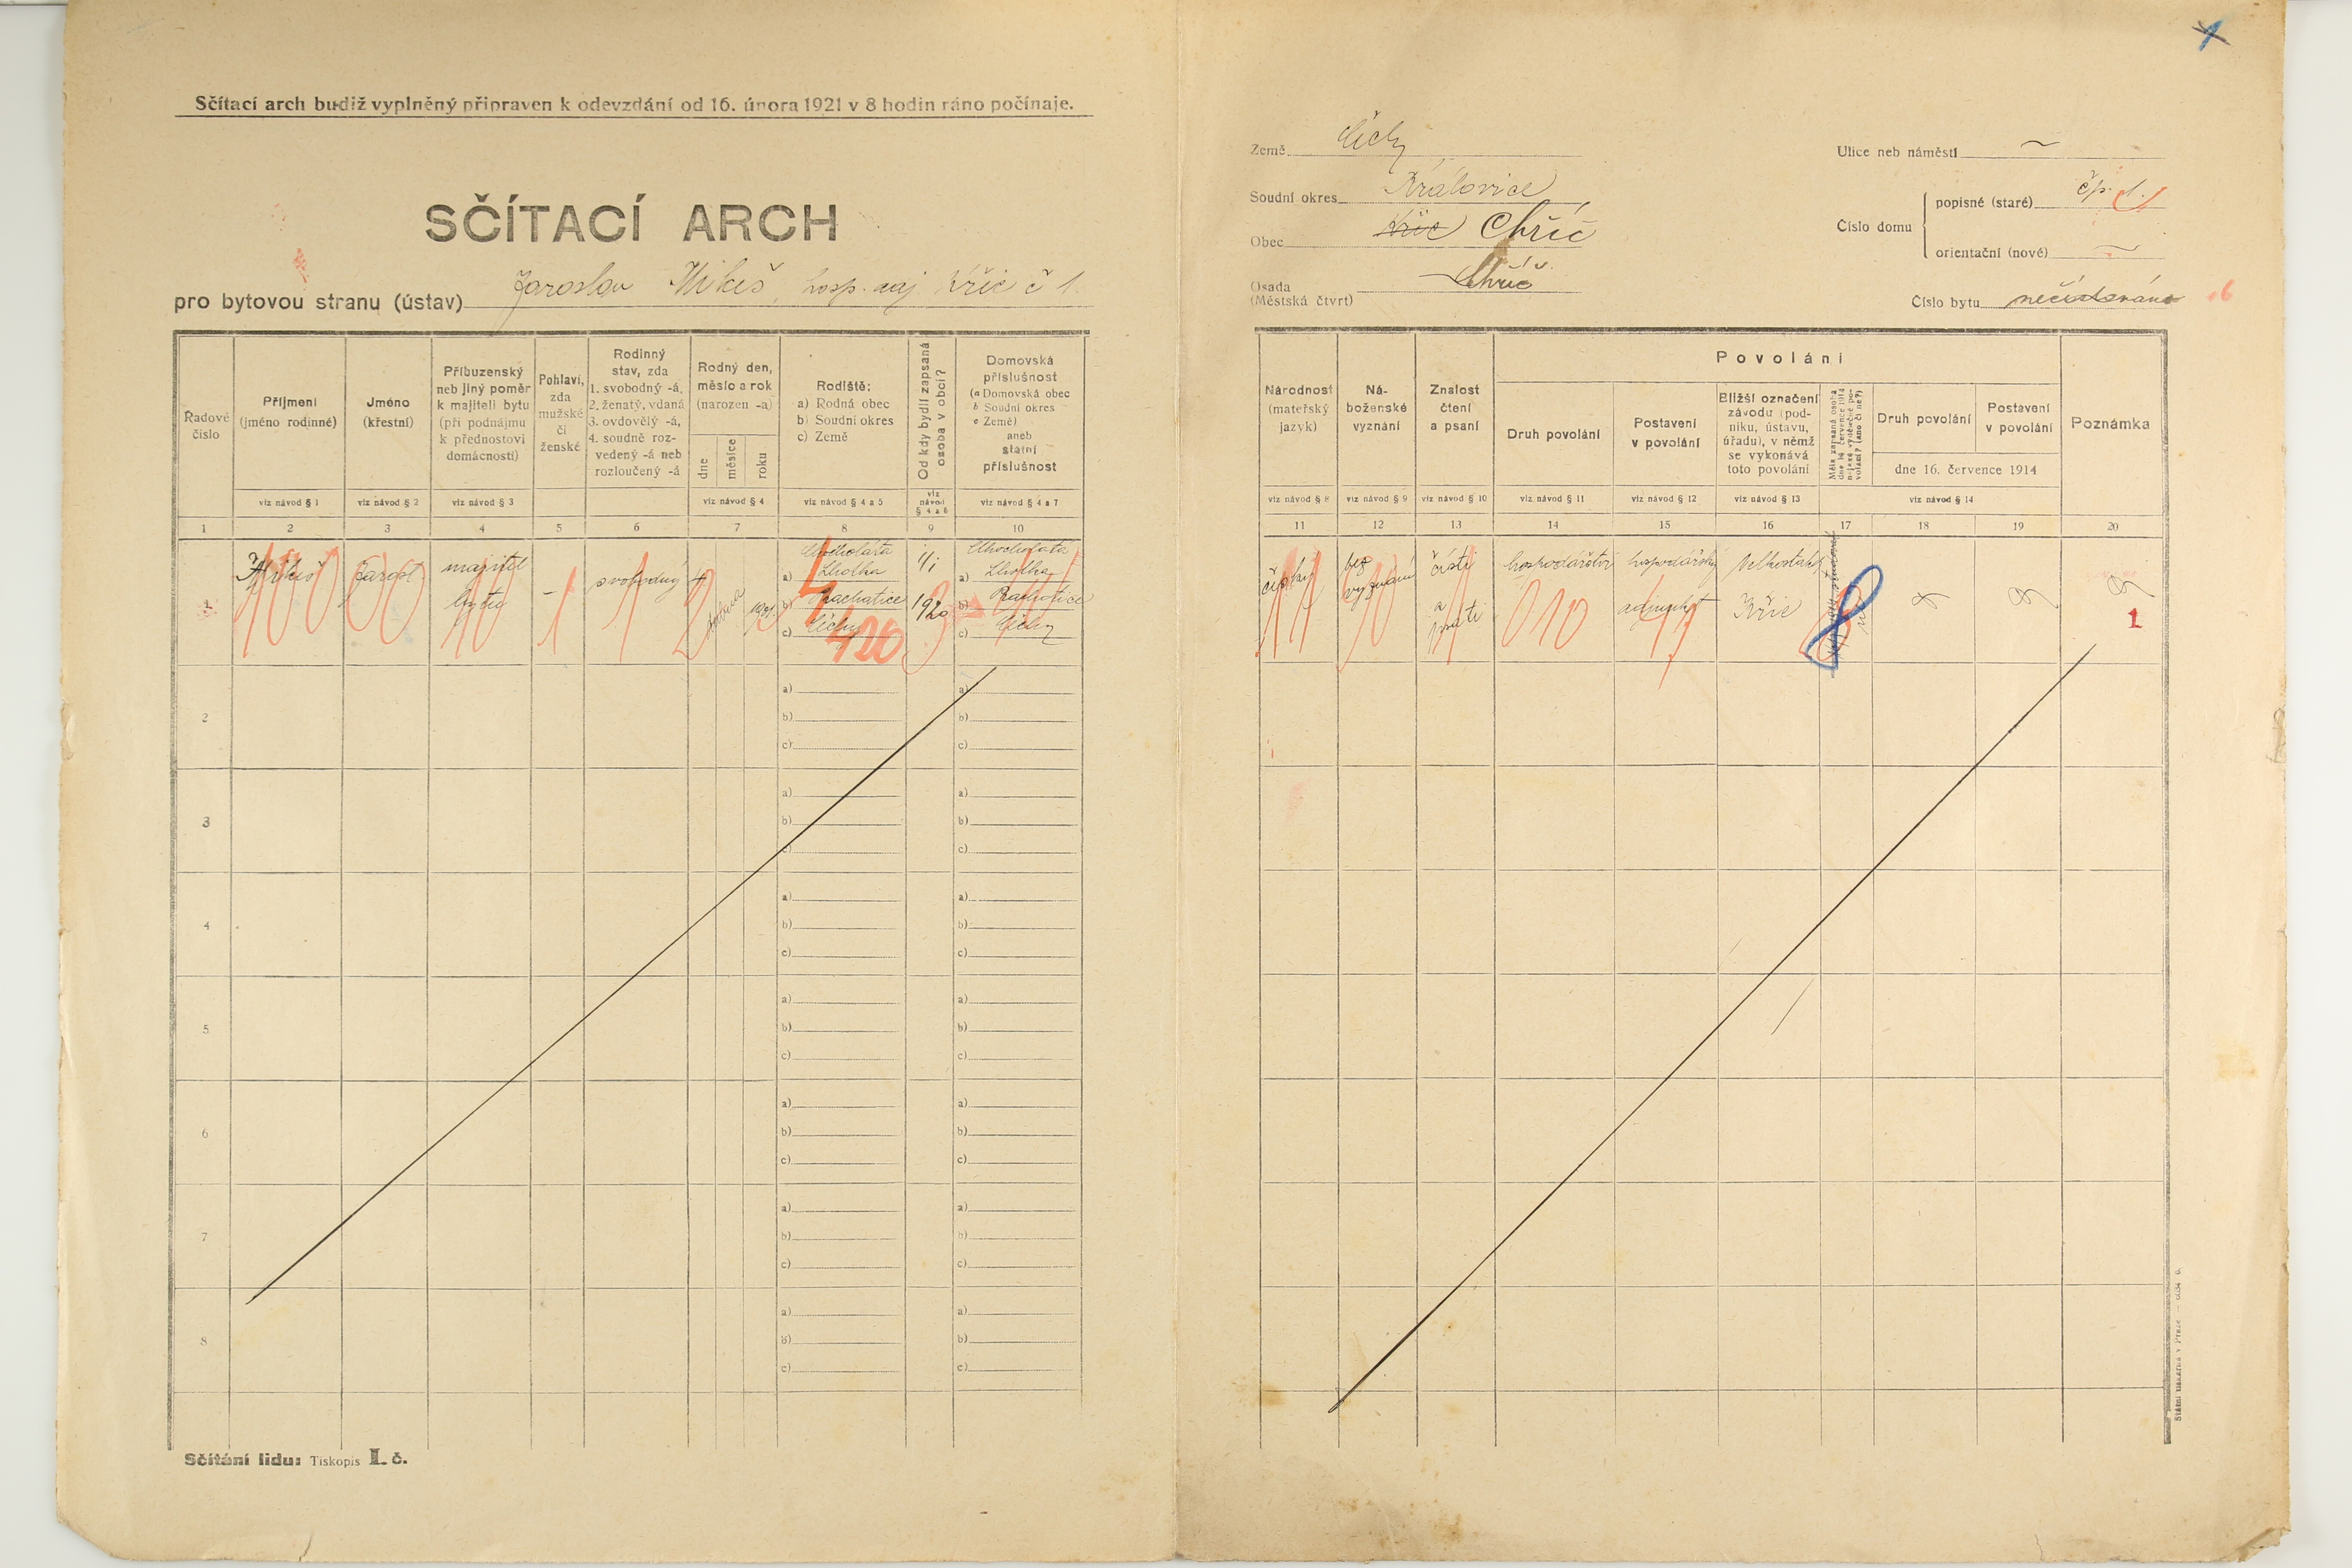 32. soap-ps_00423_census-1921-chric-cp001_0320